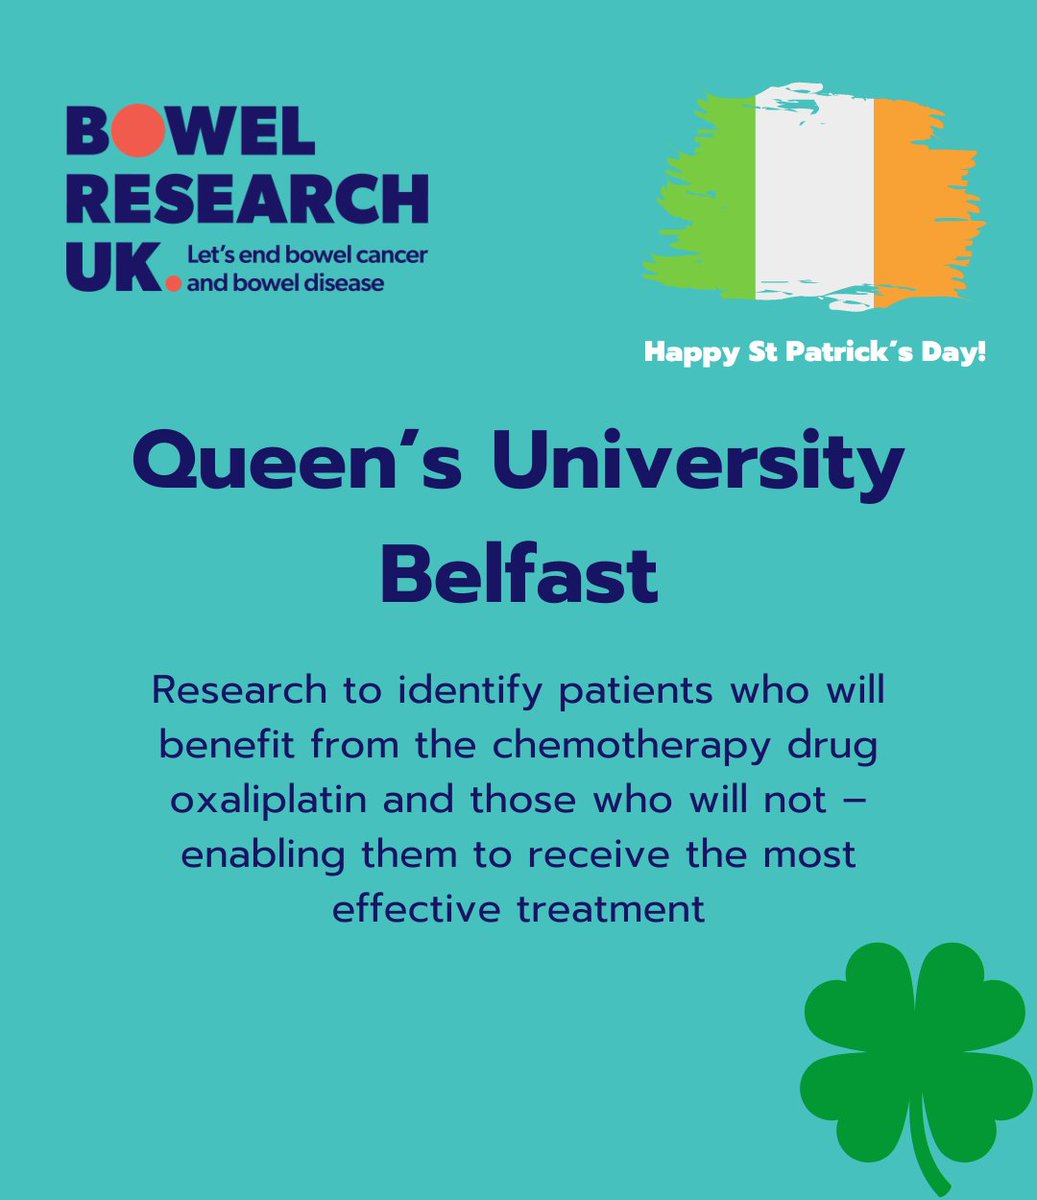 Happy Saint Patrick's Day! Today, we're shining a spotlight on Queen’s University Belfast, where a Bowel Research UK funded PhD is being undertaken by Emily Rogan, supervised by Dr Simon McDade. Find out more on our website at bowelresearchuk.org/research-hub/g… #StPatricksDay @QUBelfast